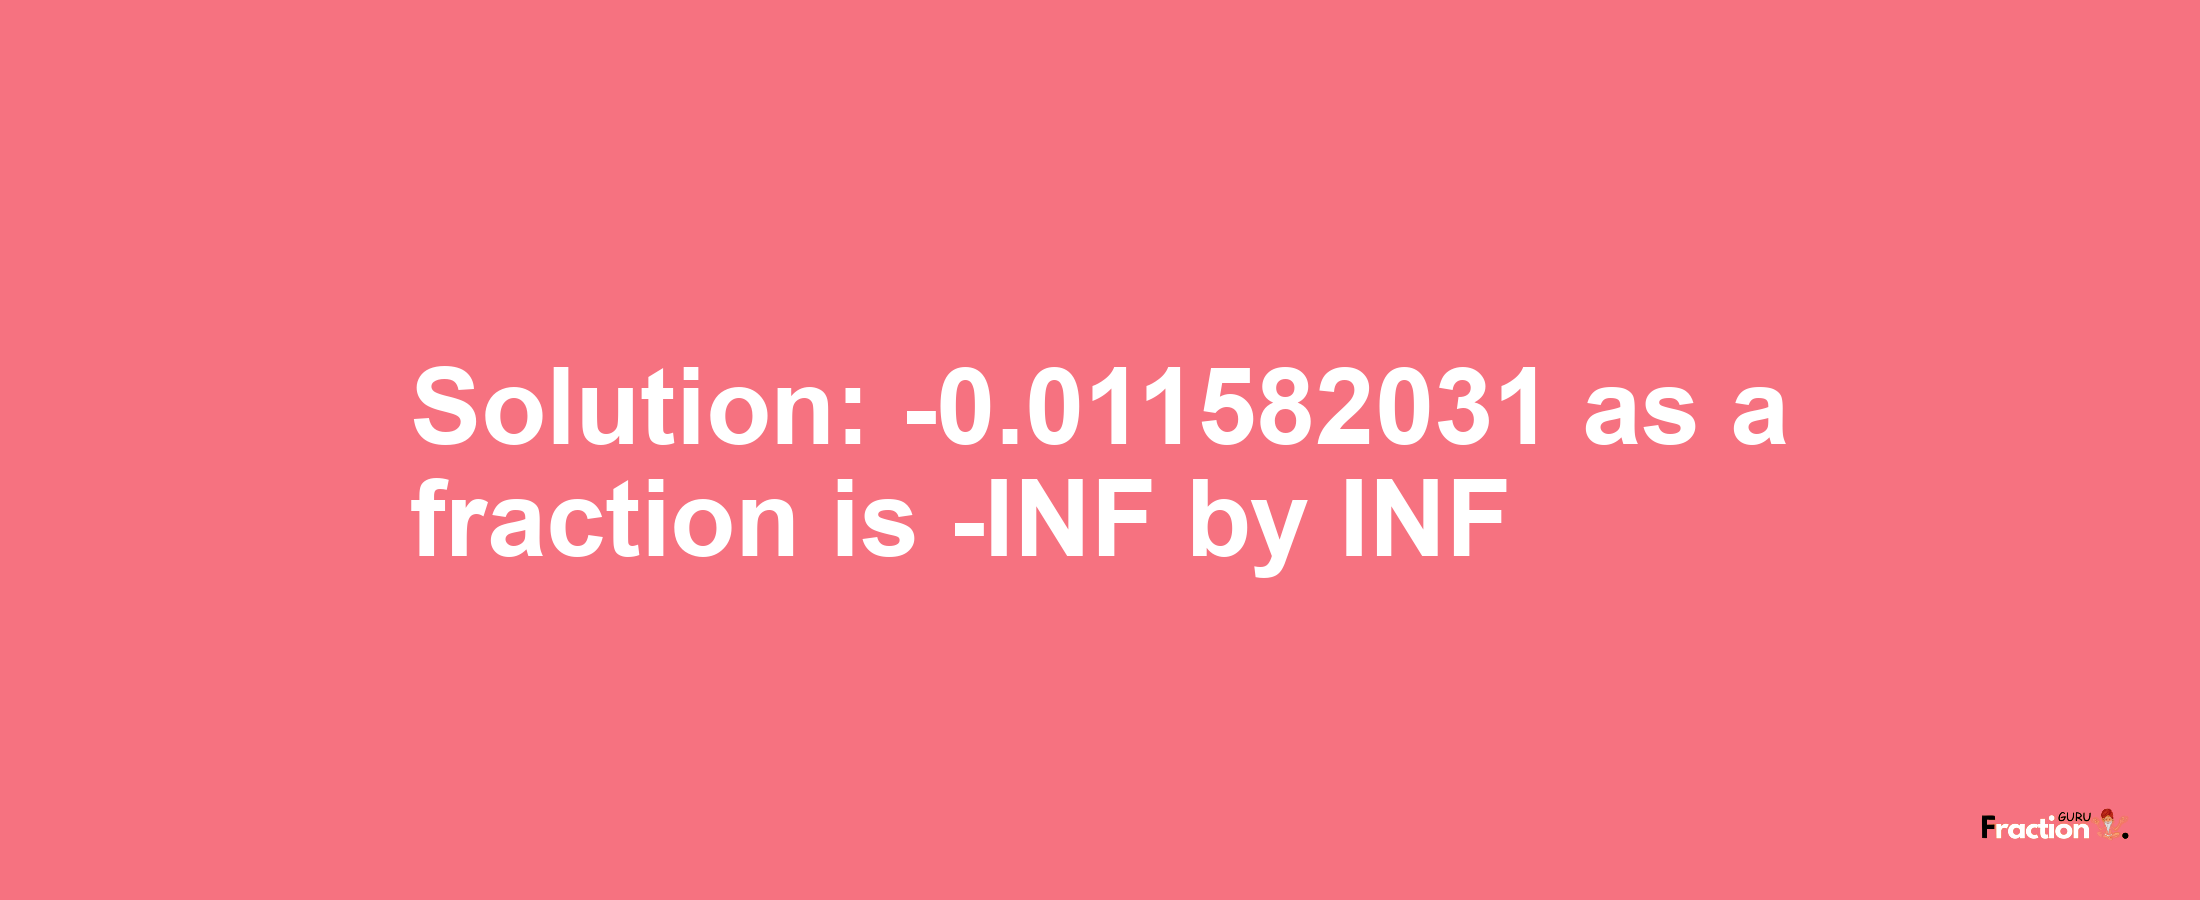 Solution:-0.011582031 as a fraction is -INF/INF